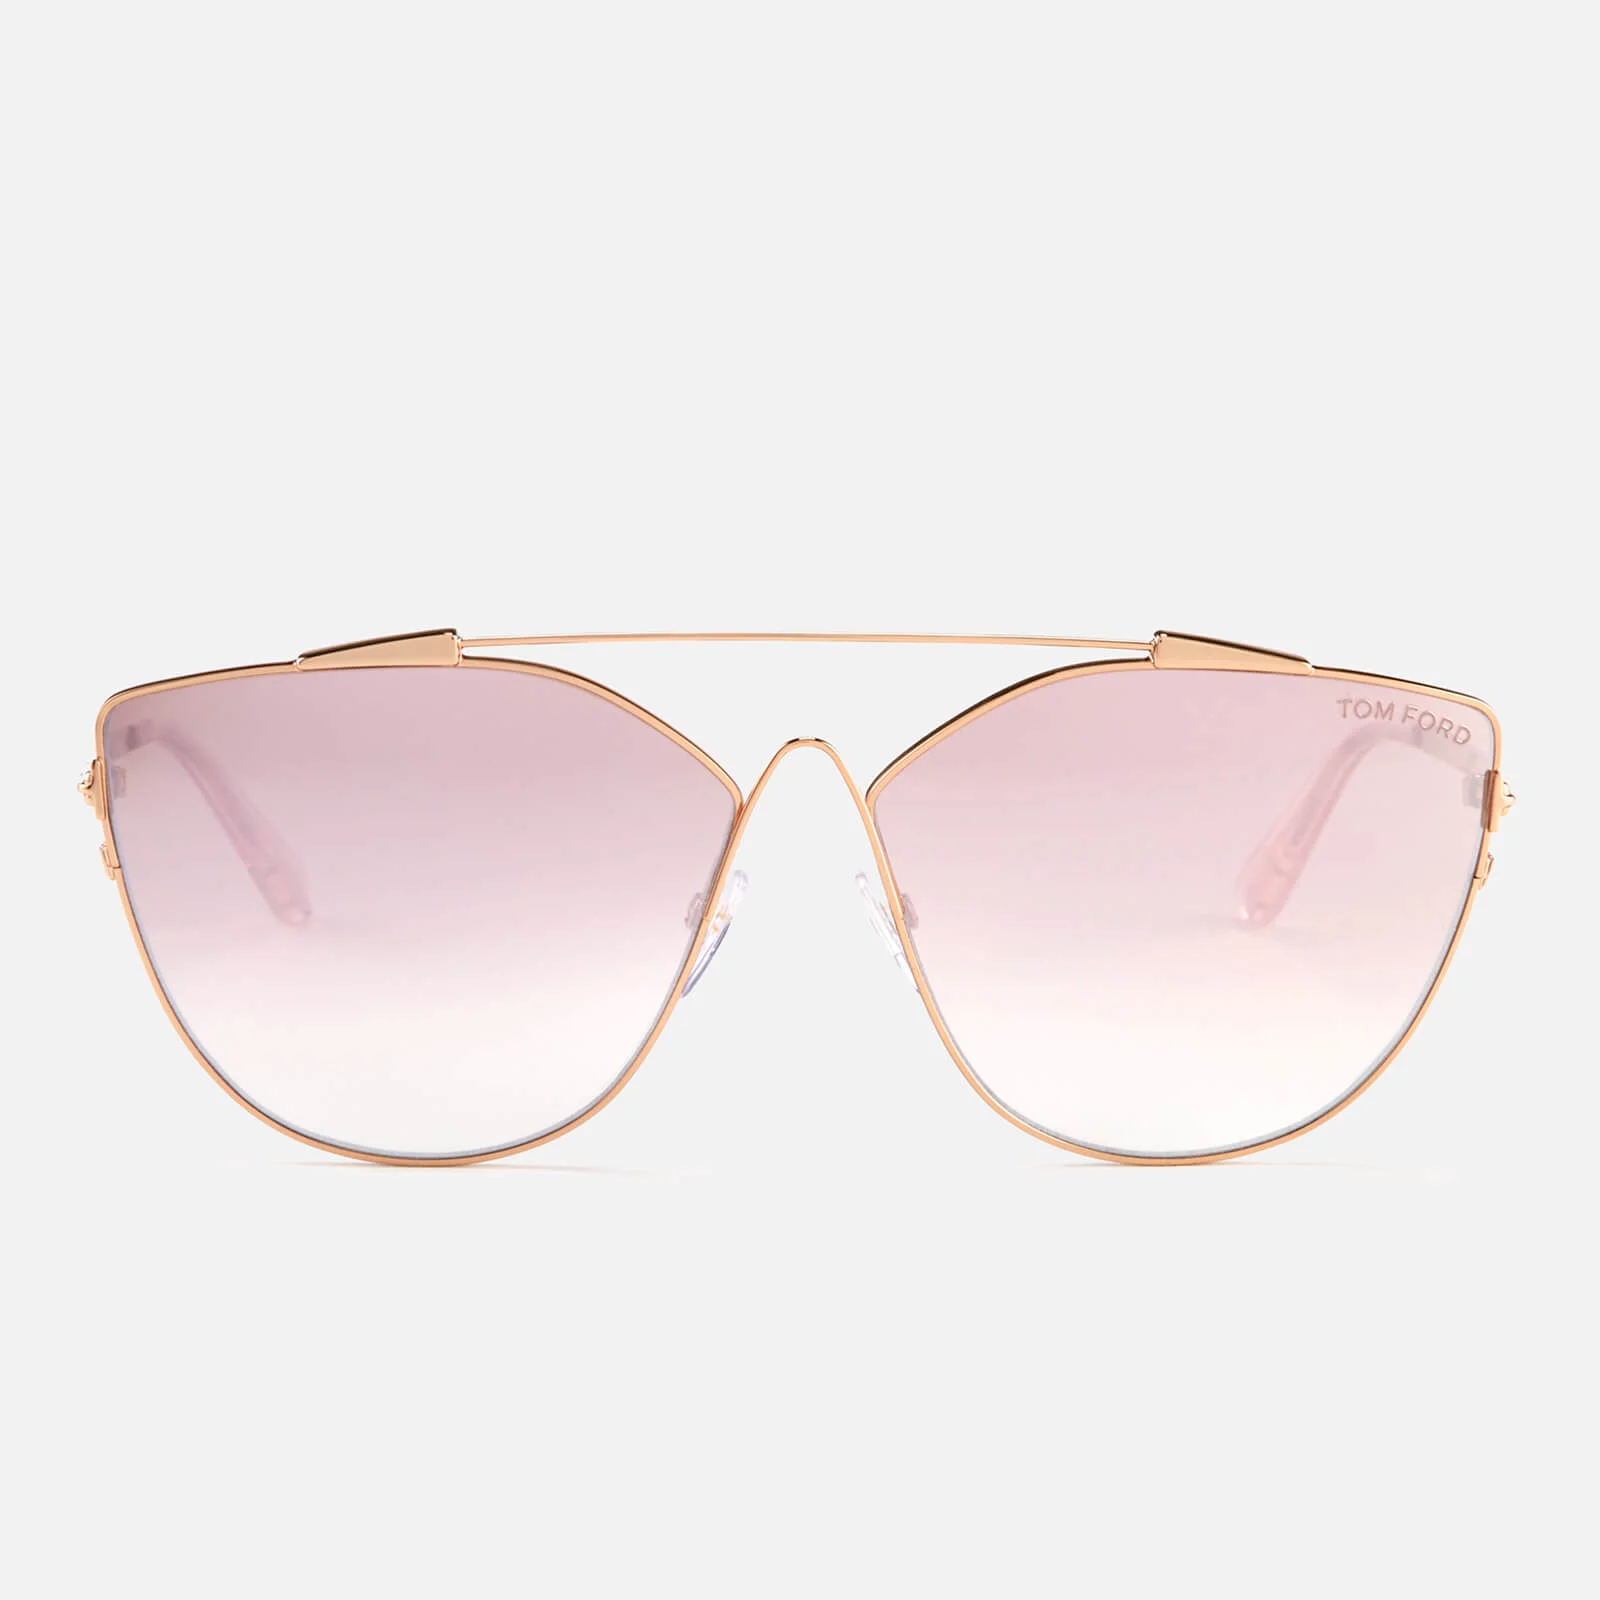 Tom Ford Women's Jacquelyn Sunglasses - Gold/Mirror Violet Image 1